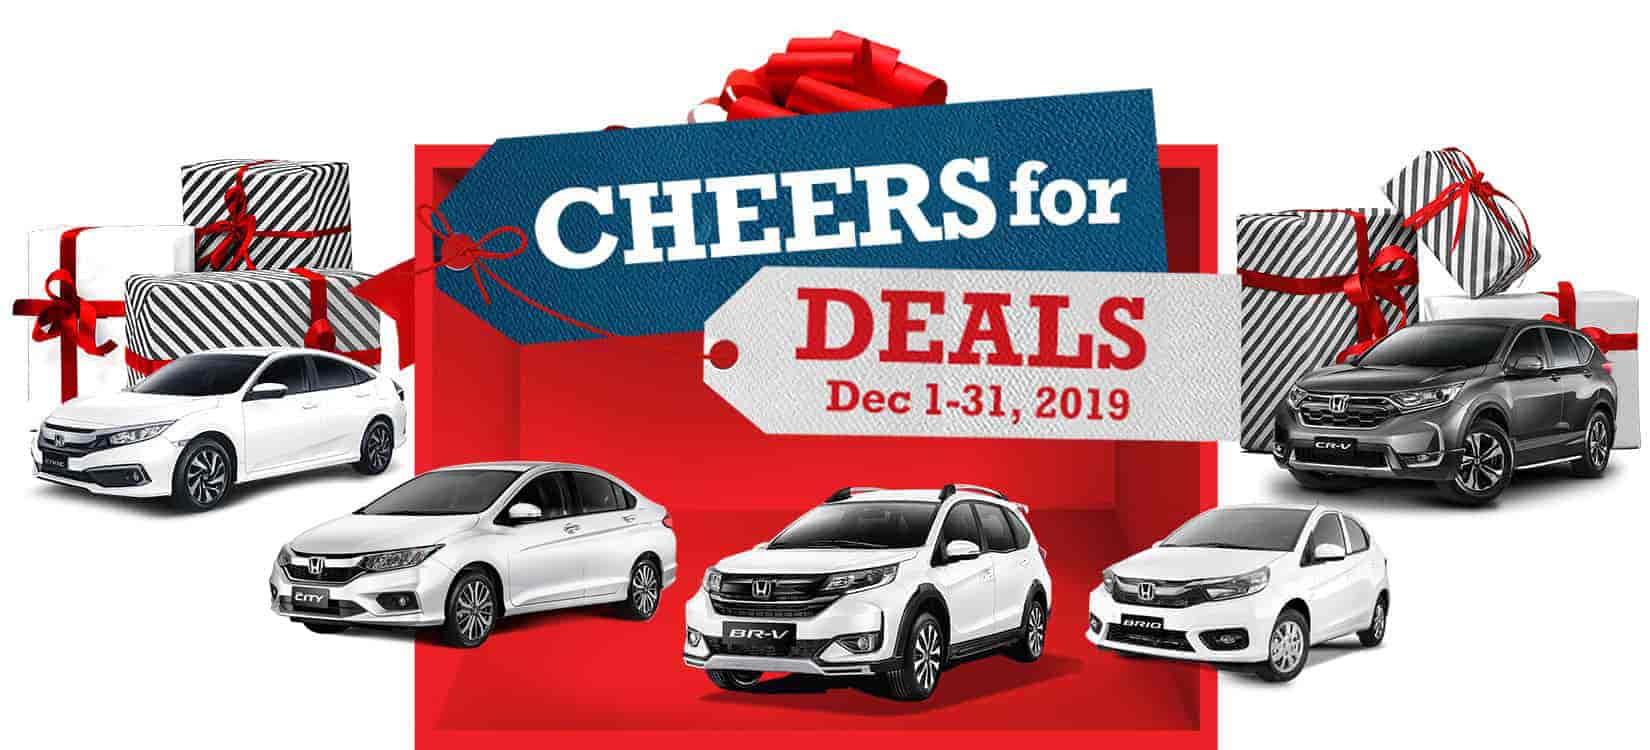 Get More Holiday Promos this December with Honda